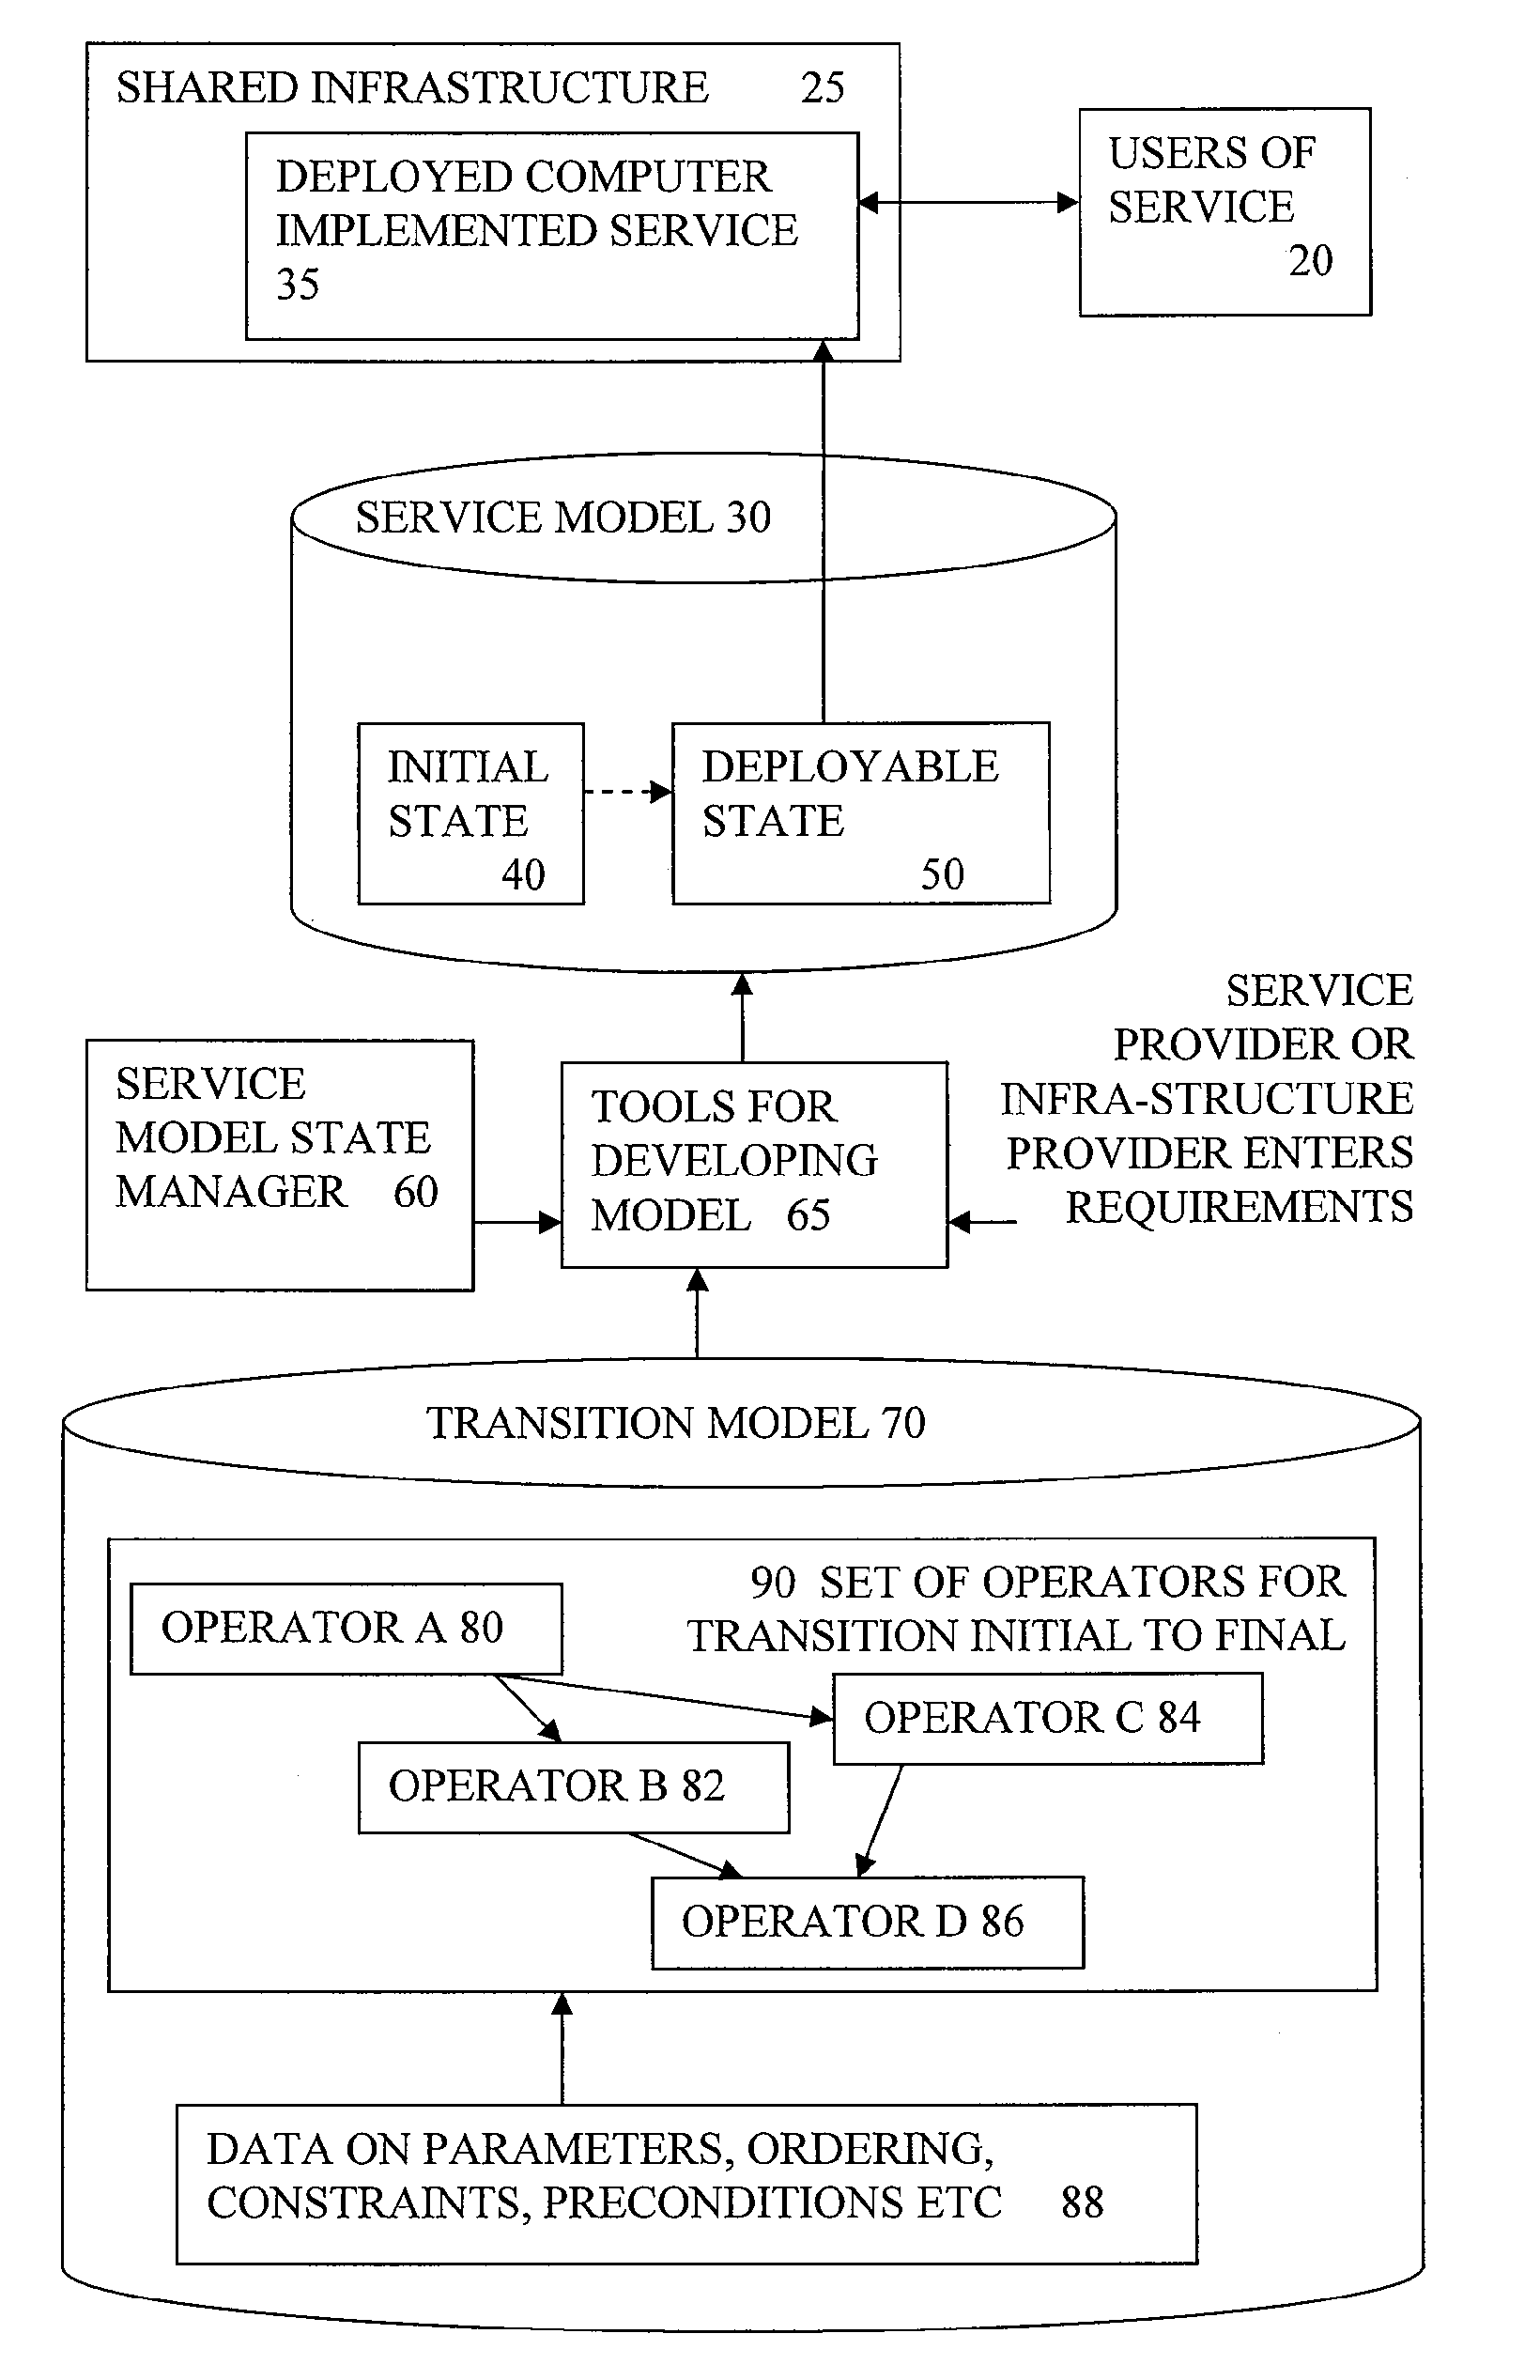 Automated lifecycle management of a computer implemented service